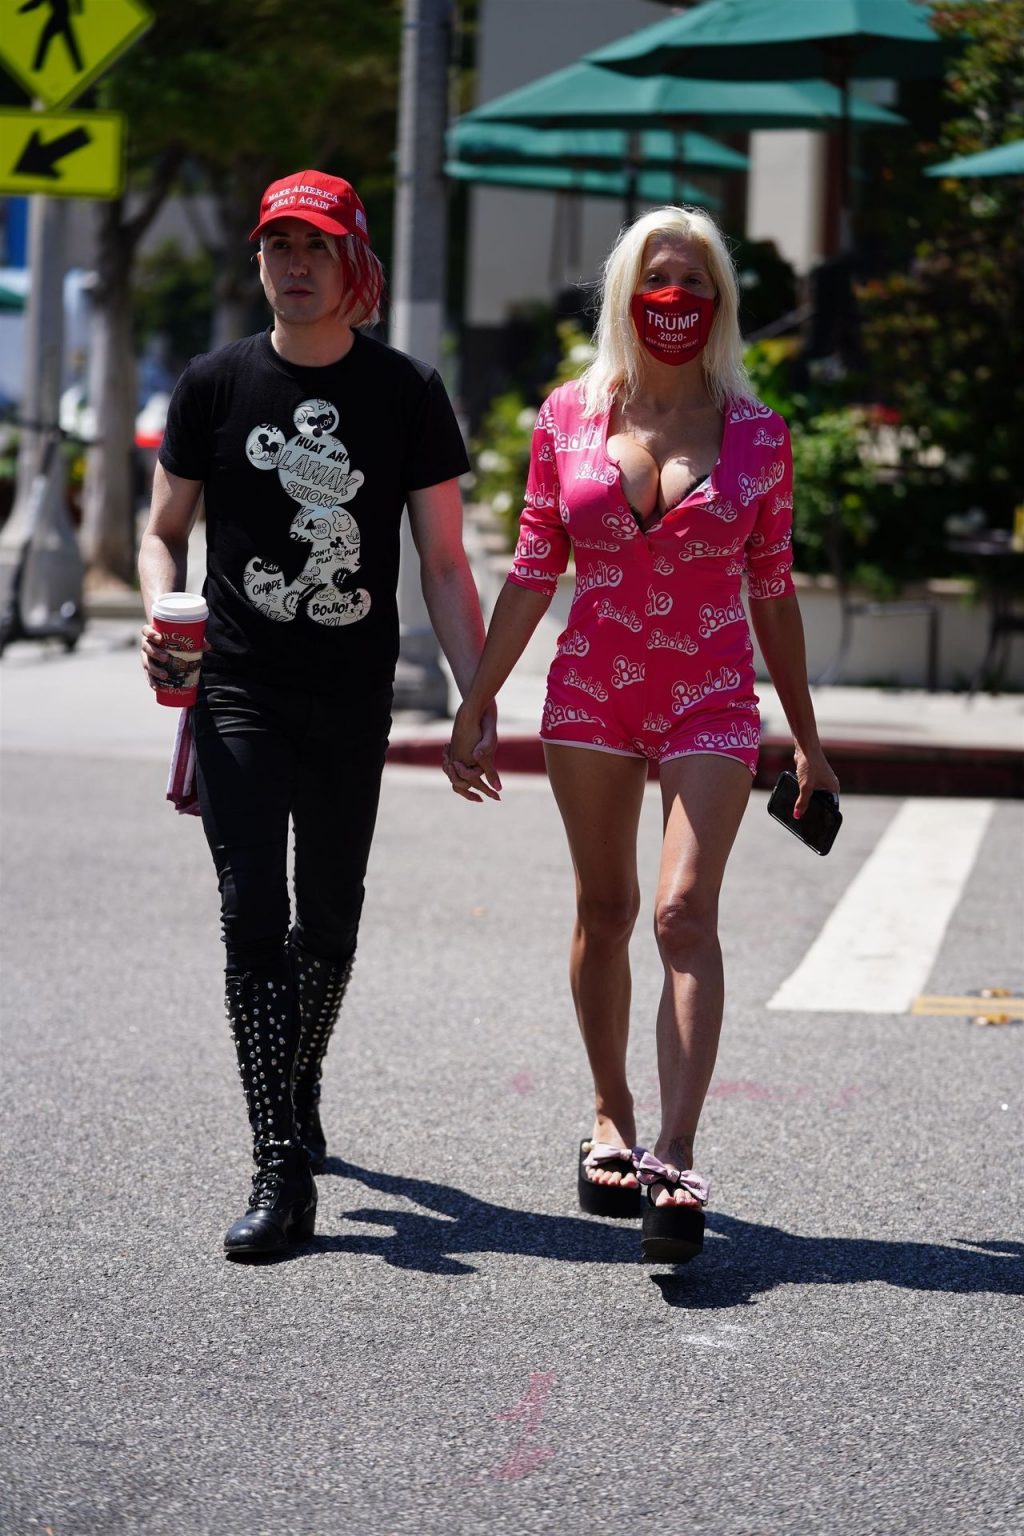 Frenchy Morgan Joins Ricky Rebel for Coffee and a Walk on the Beach (53 Photos)